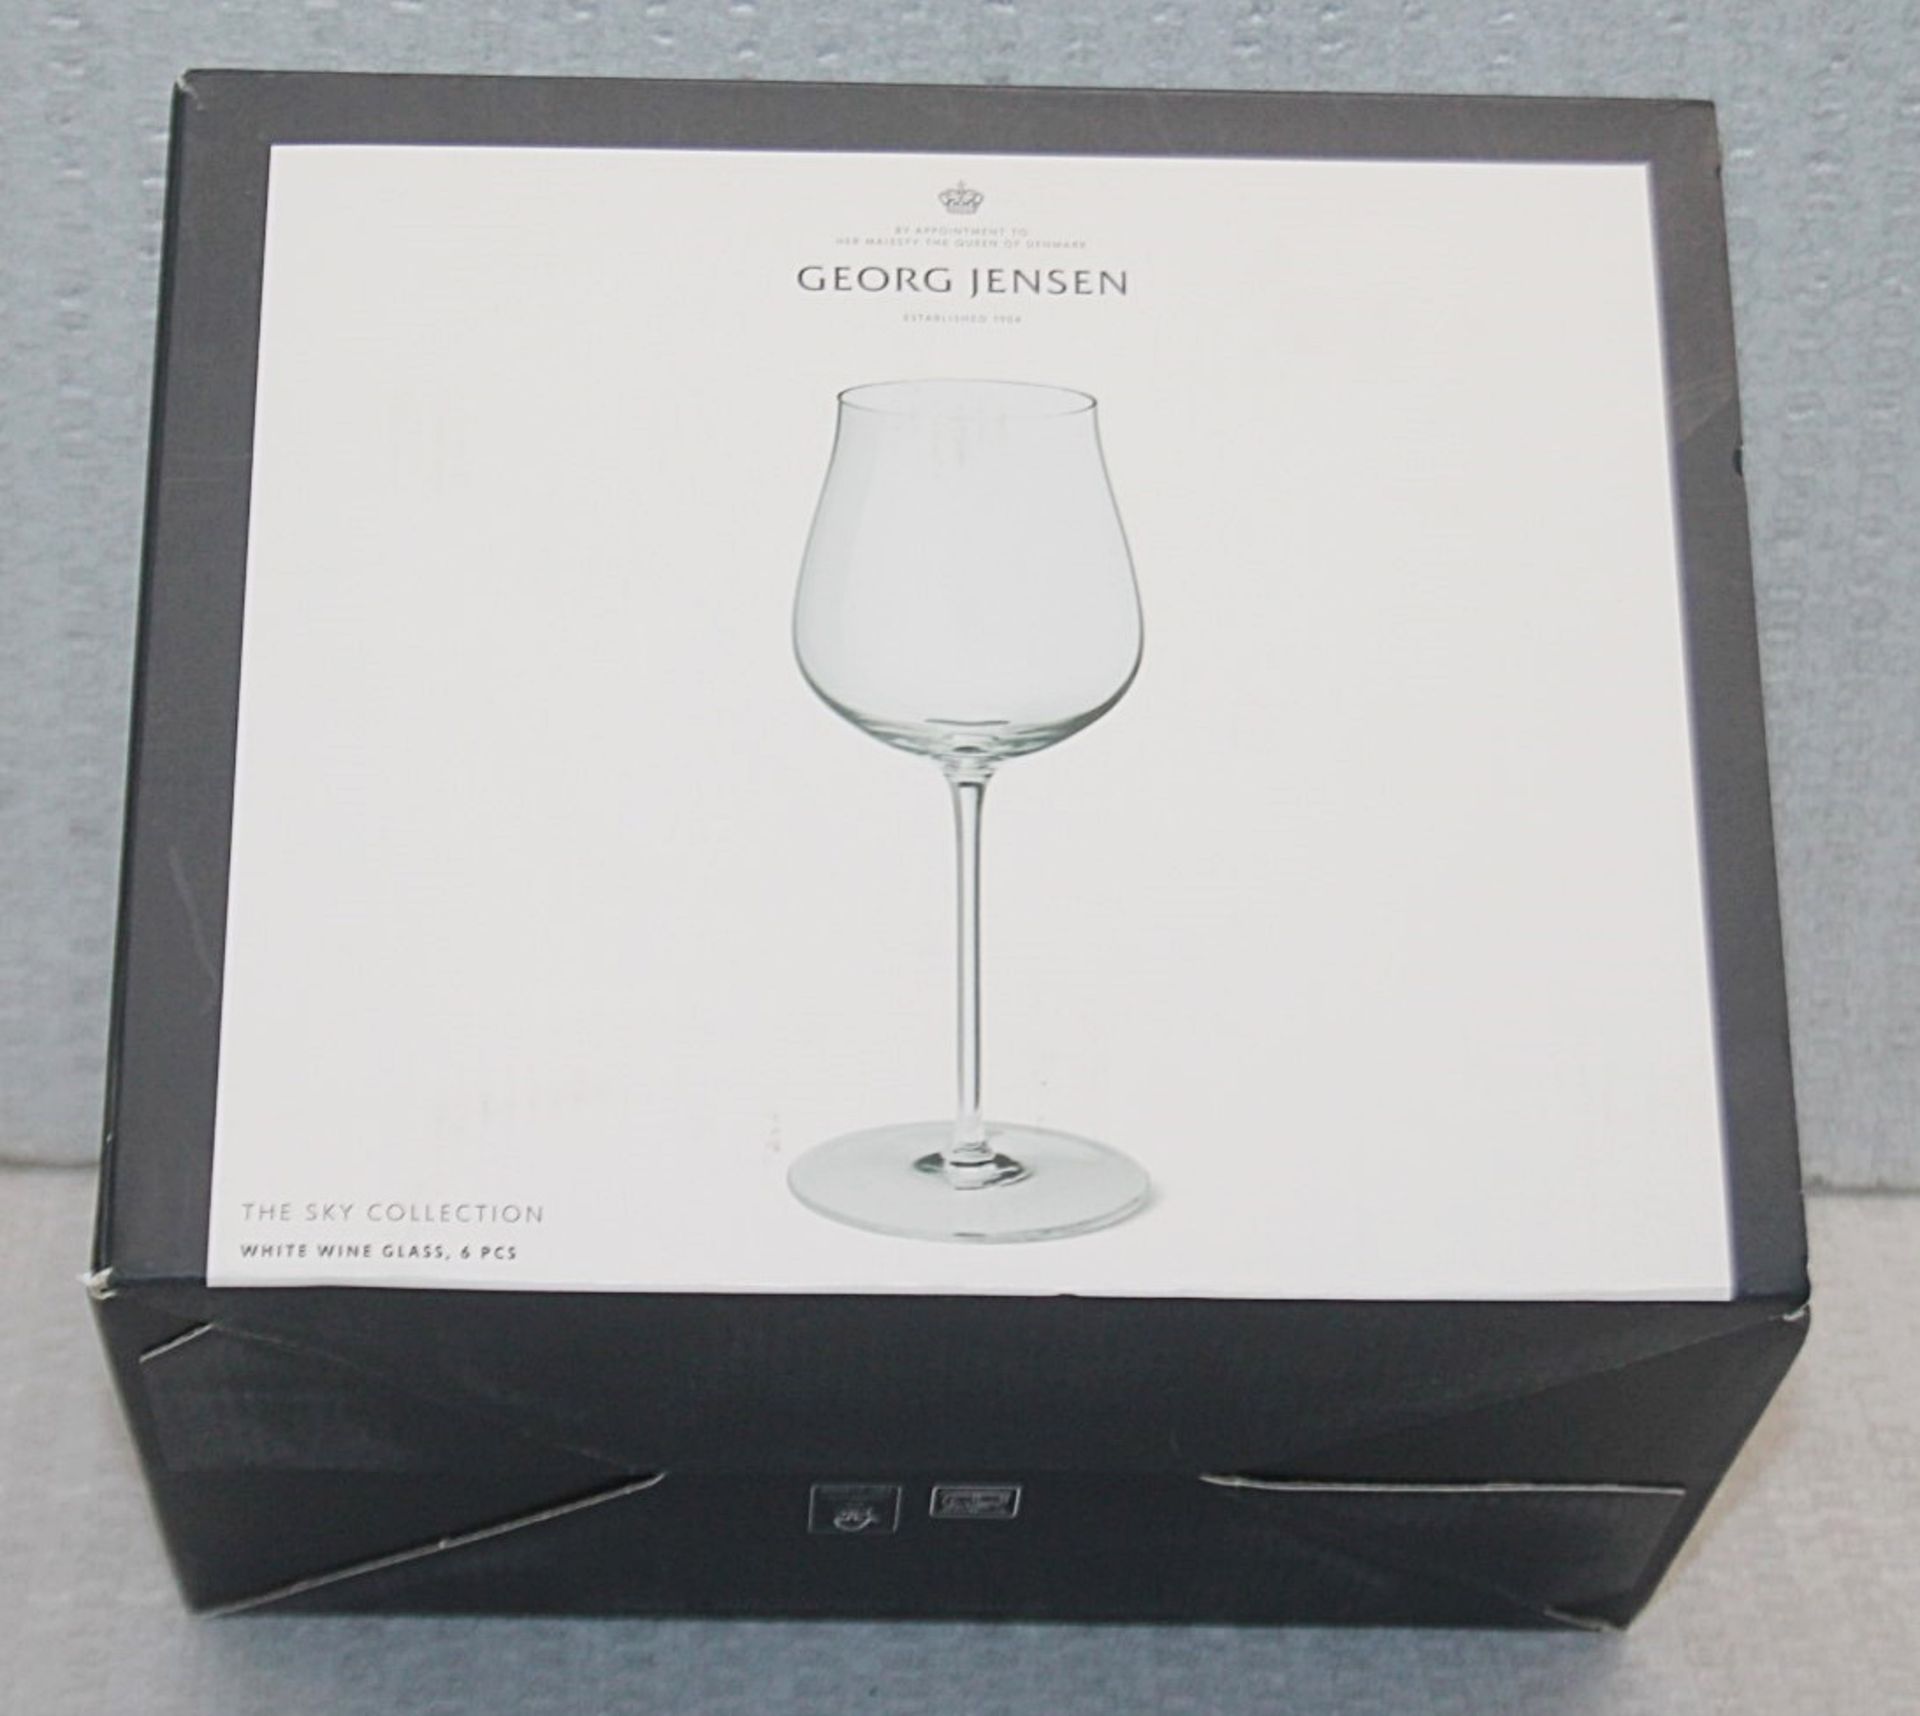 5 x GEORG JENSEN 'Sky' Crystal White Wine Glass - Ref: 6864831/HAS2157/WH2-C5/02-23-1 - CL987 - - Image 2 of 8